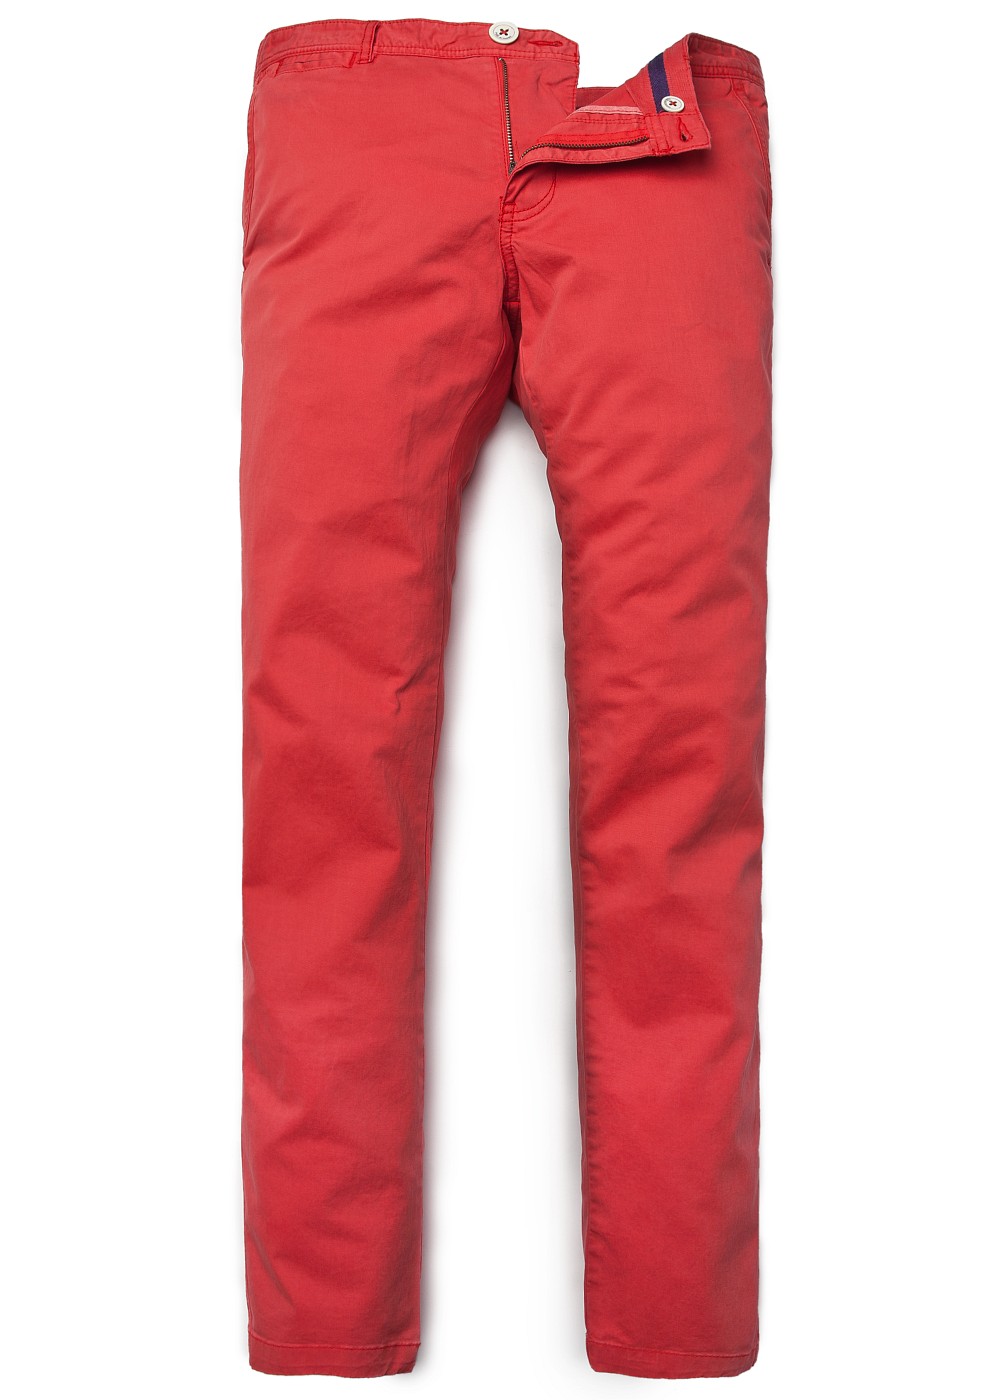 Lyst - Mango Trousers Barna8 in Red for Men